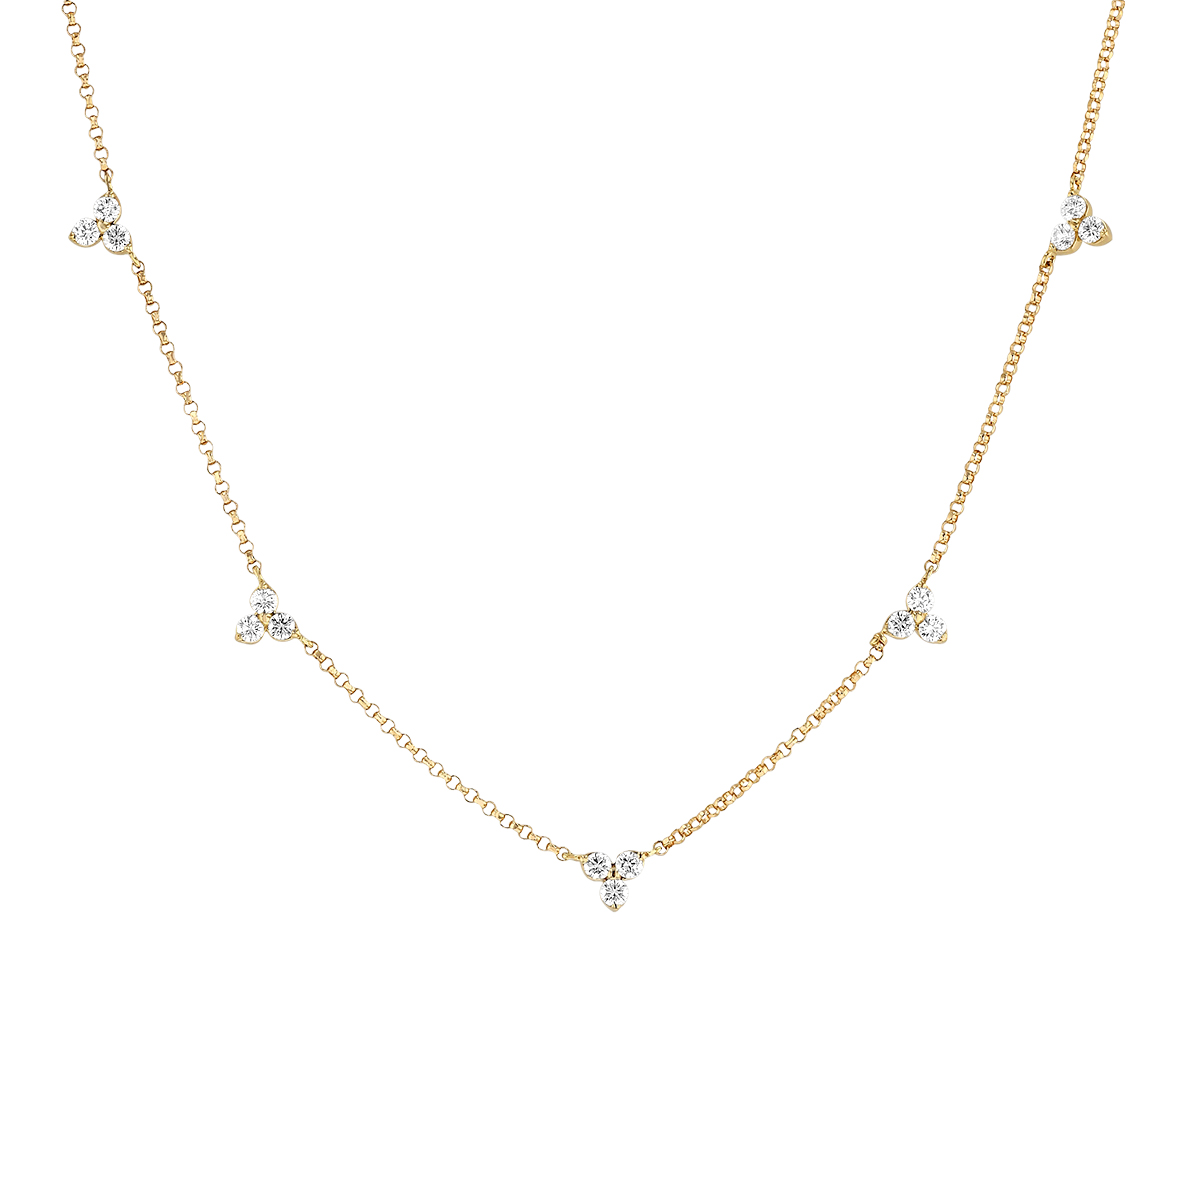 Roberto Coin Diamond Trio 5 Station Necklace in Yellow Gold, 18 ...